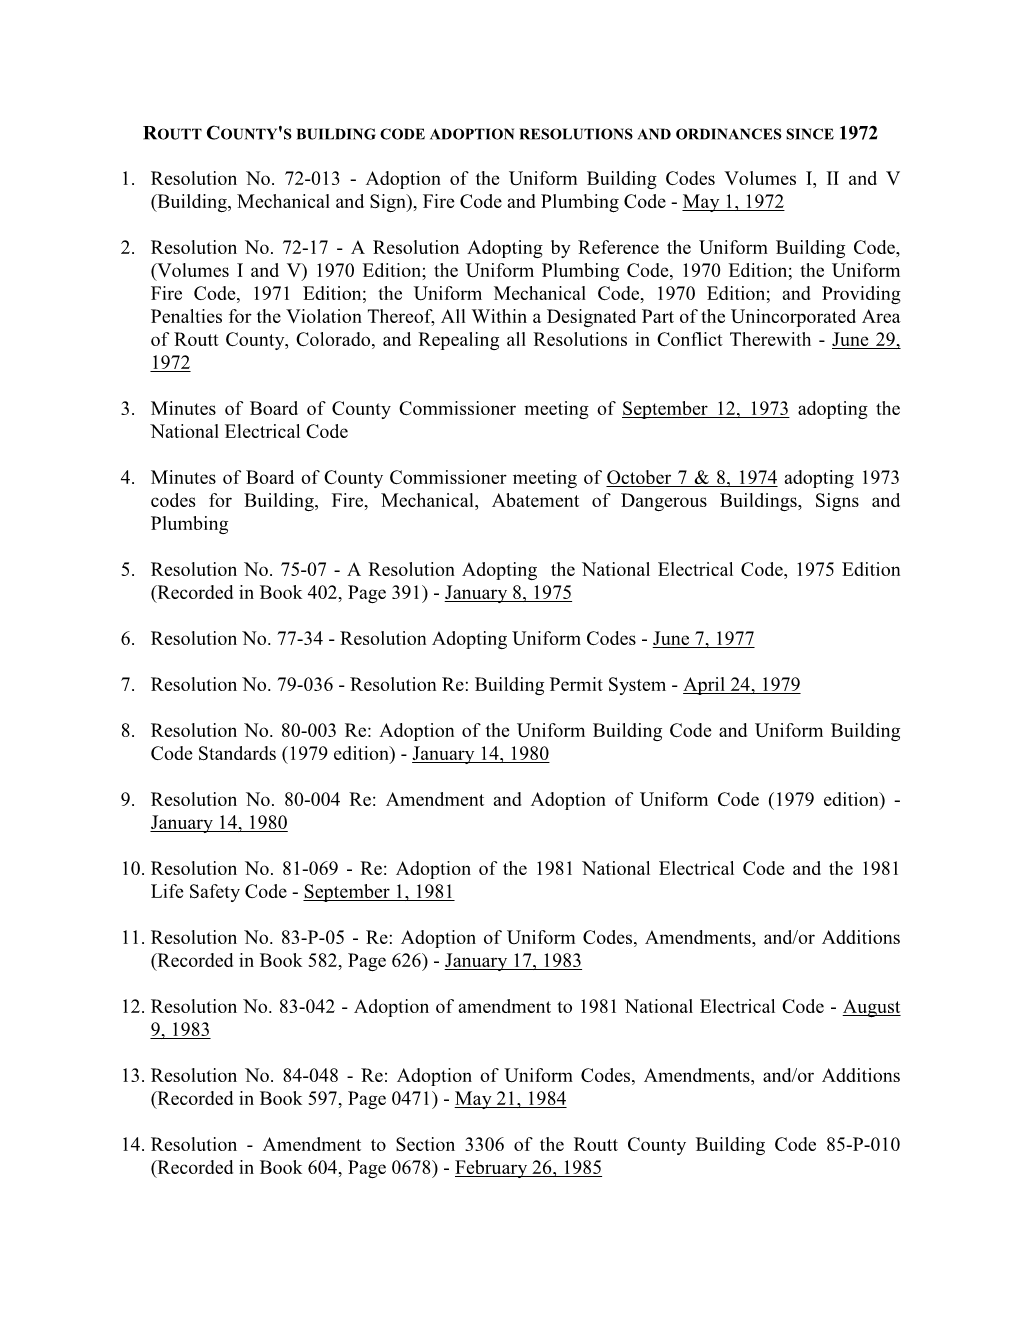 Adoption of the Uniform Building Codes Volumes I, II and V (Building, Mechanical and Sign), Fire Code and Plumbing Code - May 1, 1972